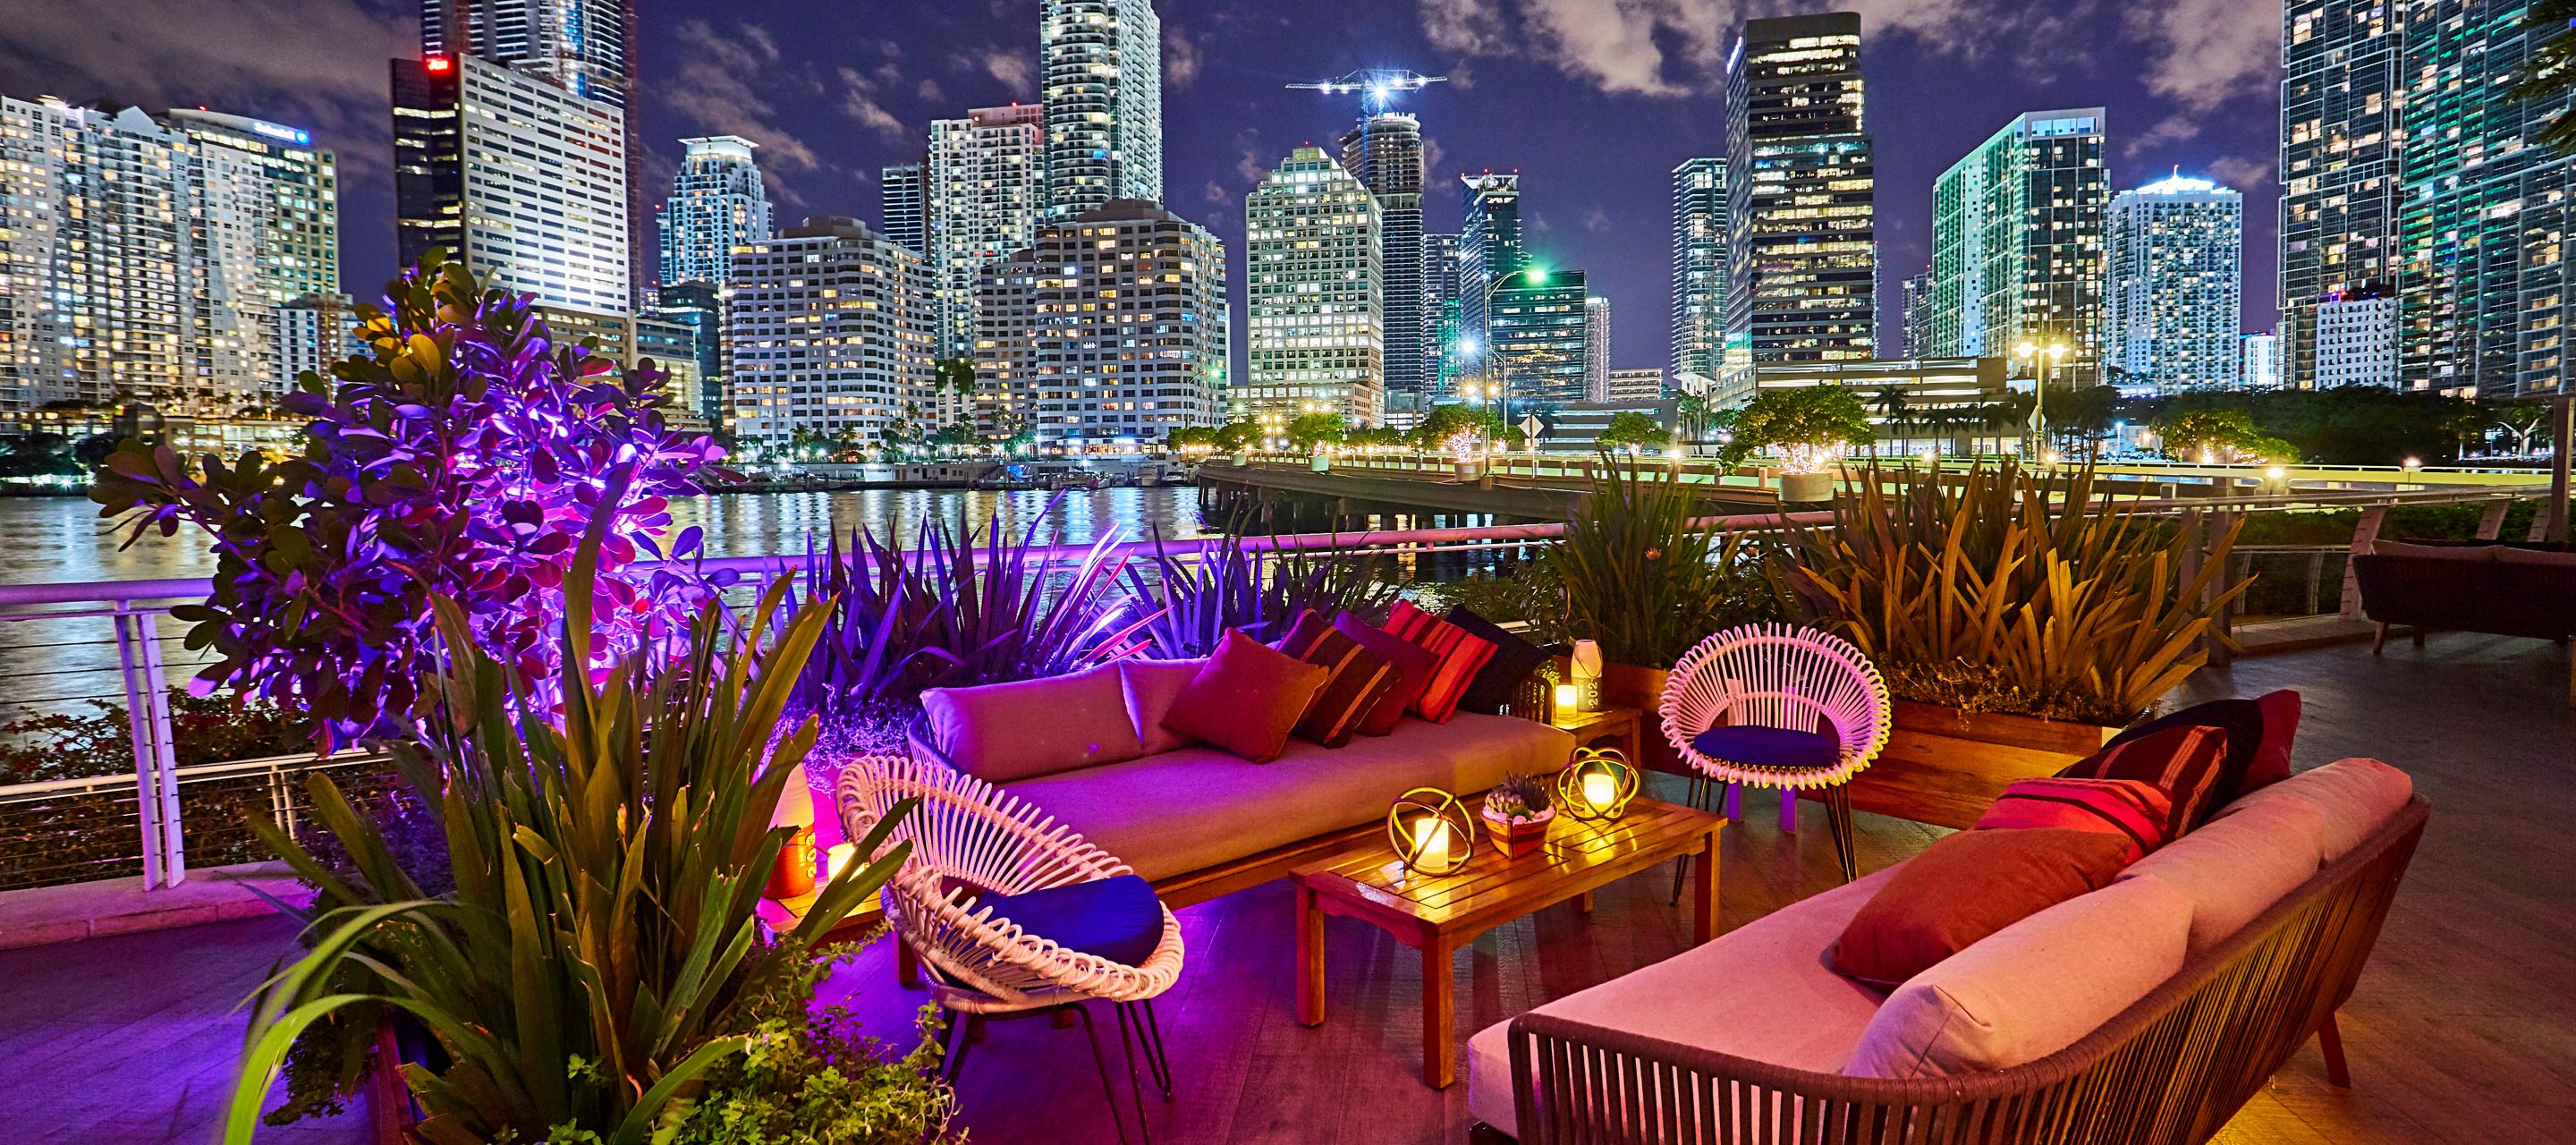 Waterfront Restaurants in Miami 9 Best MiamiCurated